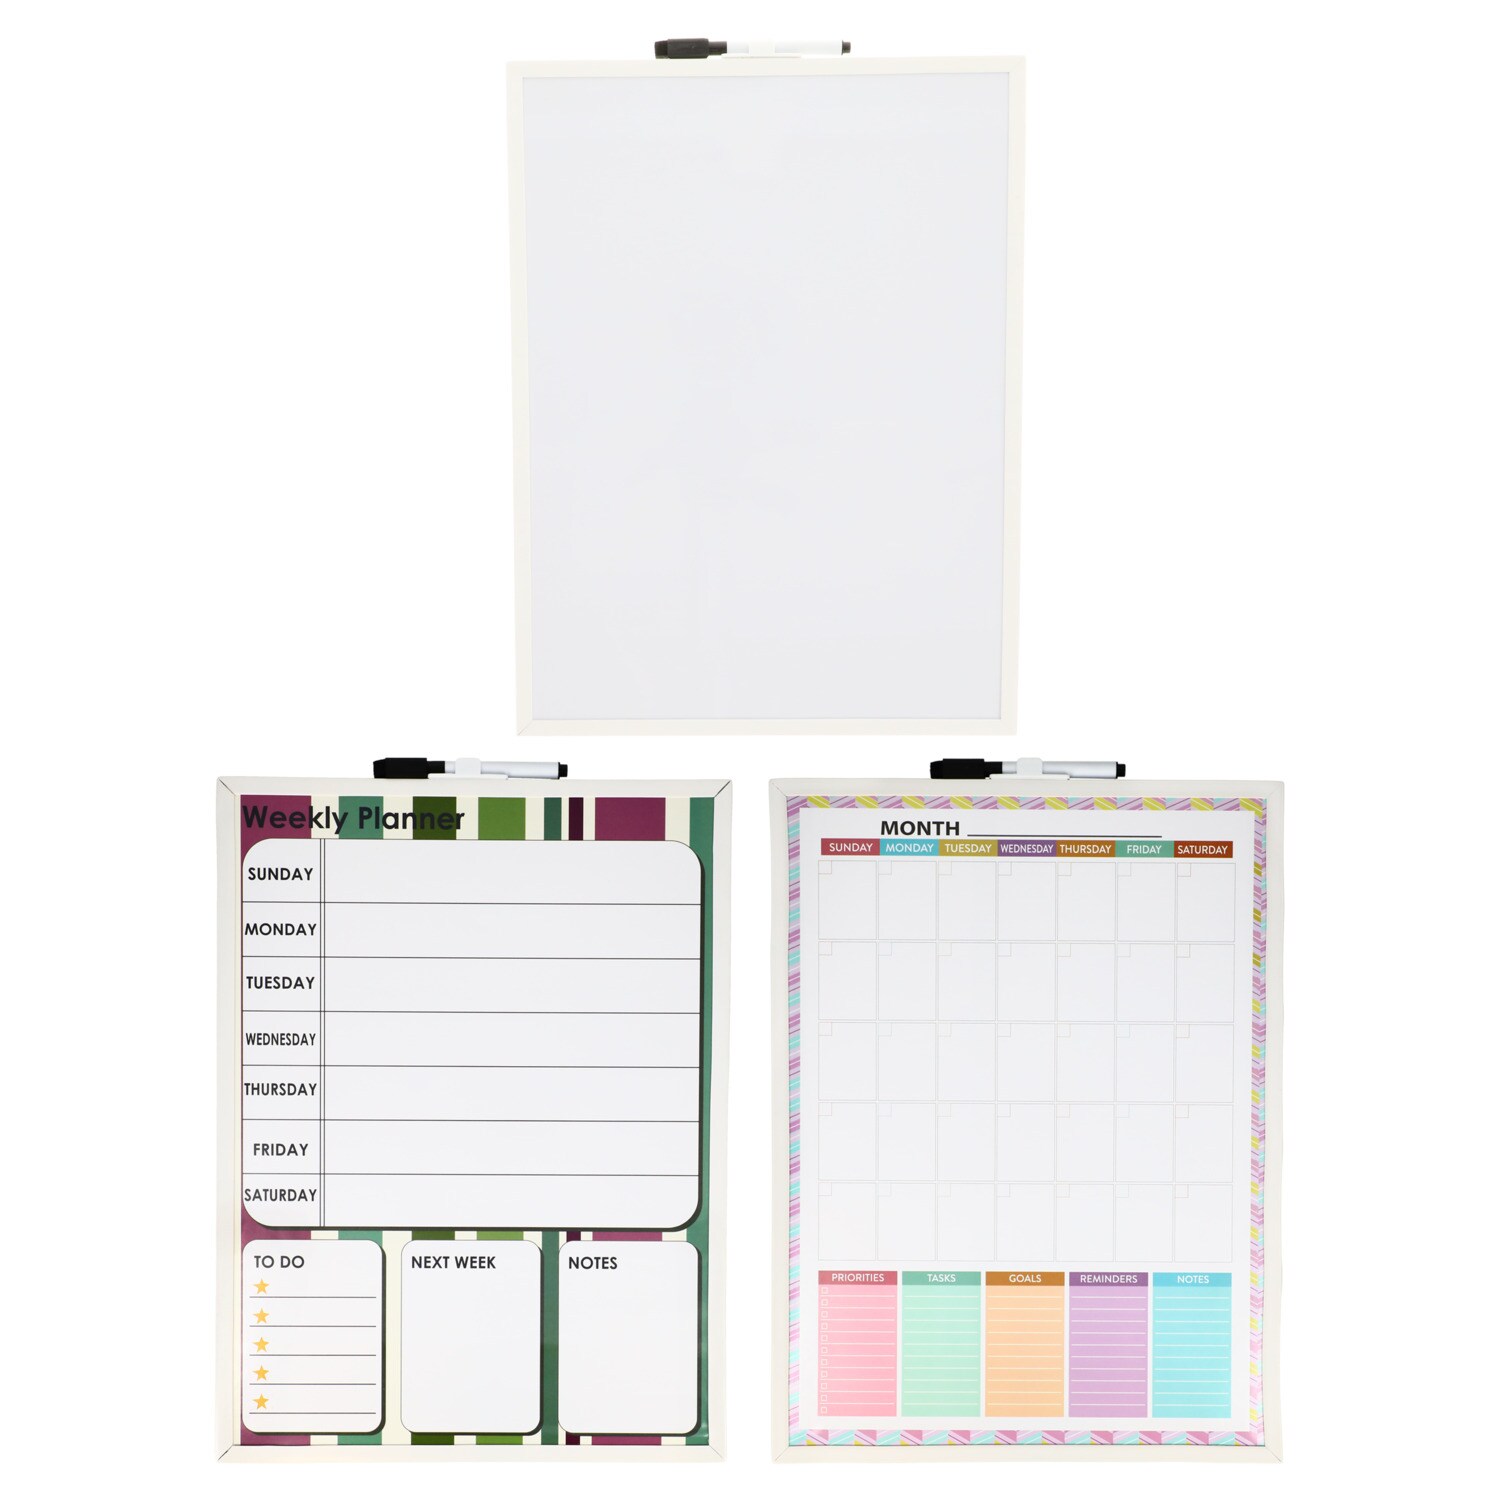 View Dry Erase Board with Marker,